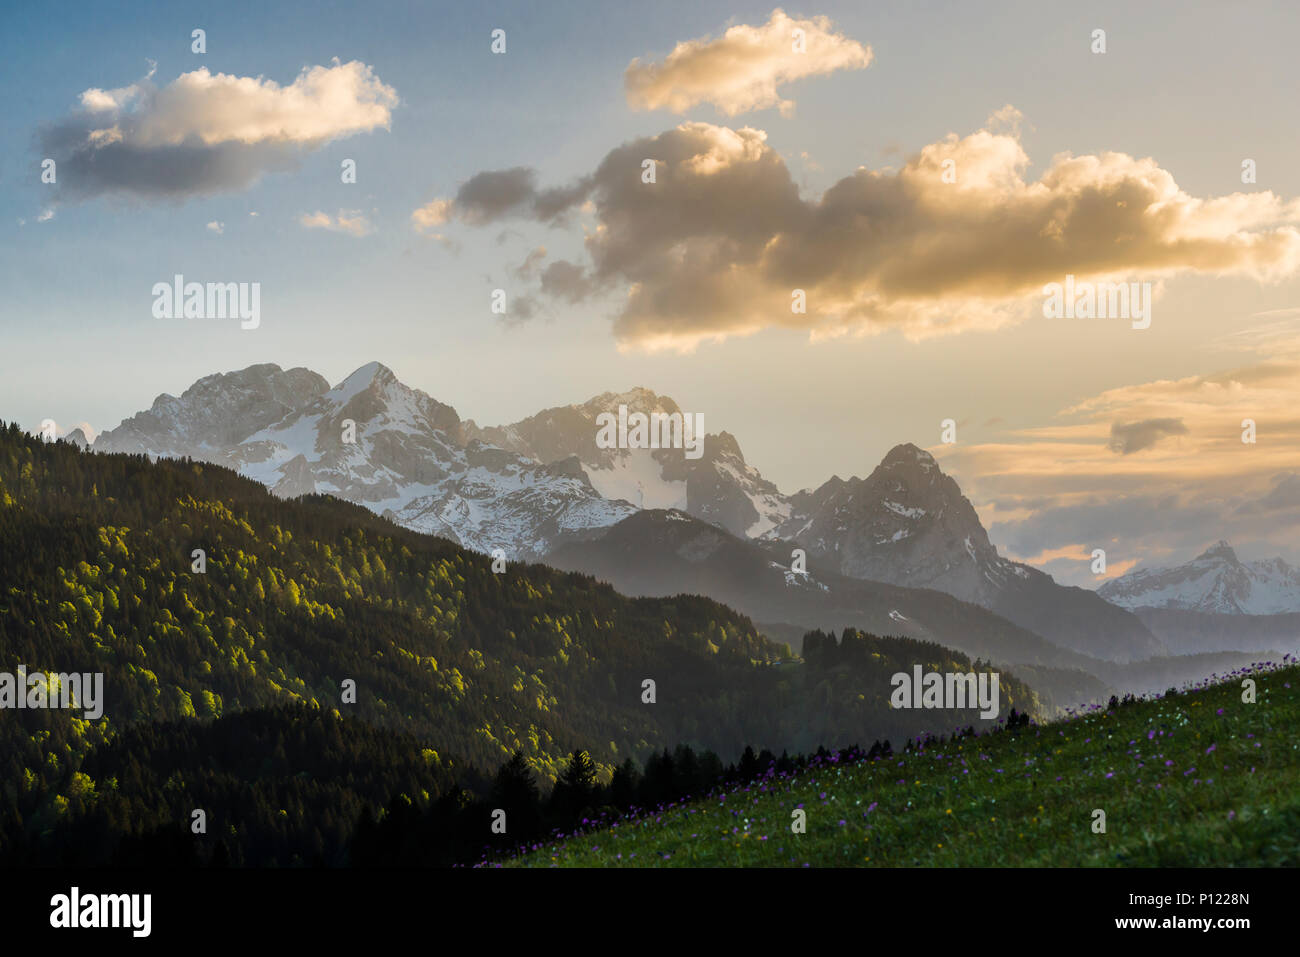 Mount Alpspitze, Mount Zugspitze and Waxenstein of the Wetterstein mountains with clouds just before sunset, Bavaria, Germany Stock Photo